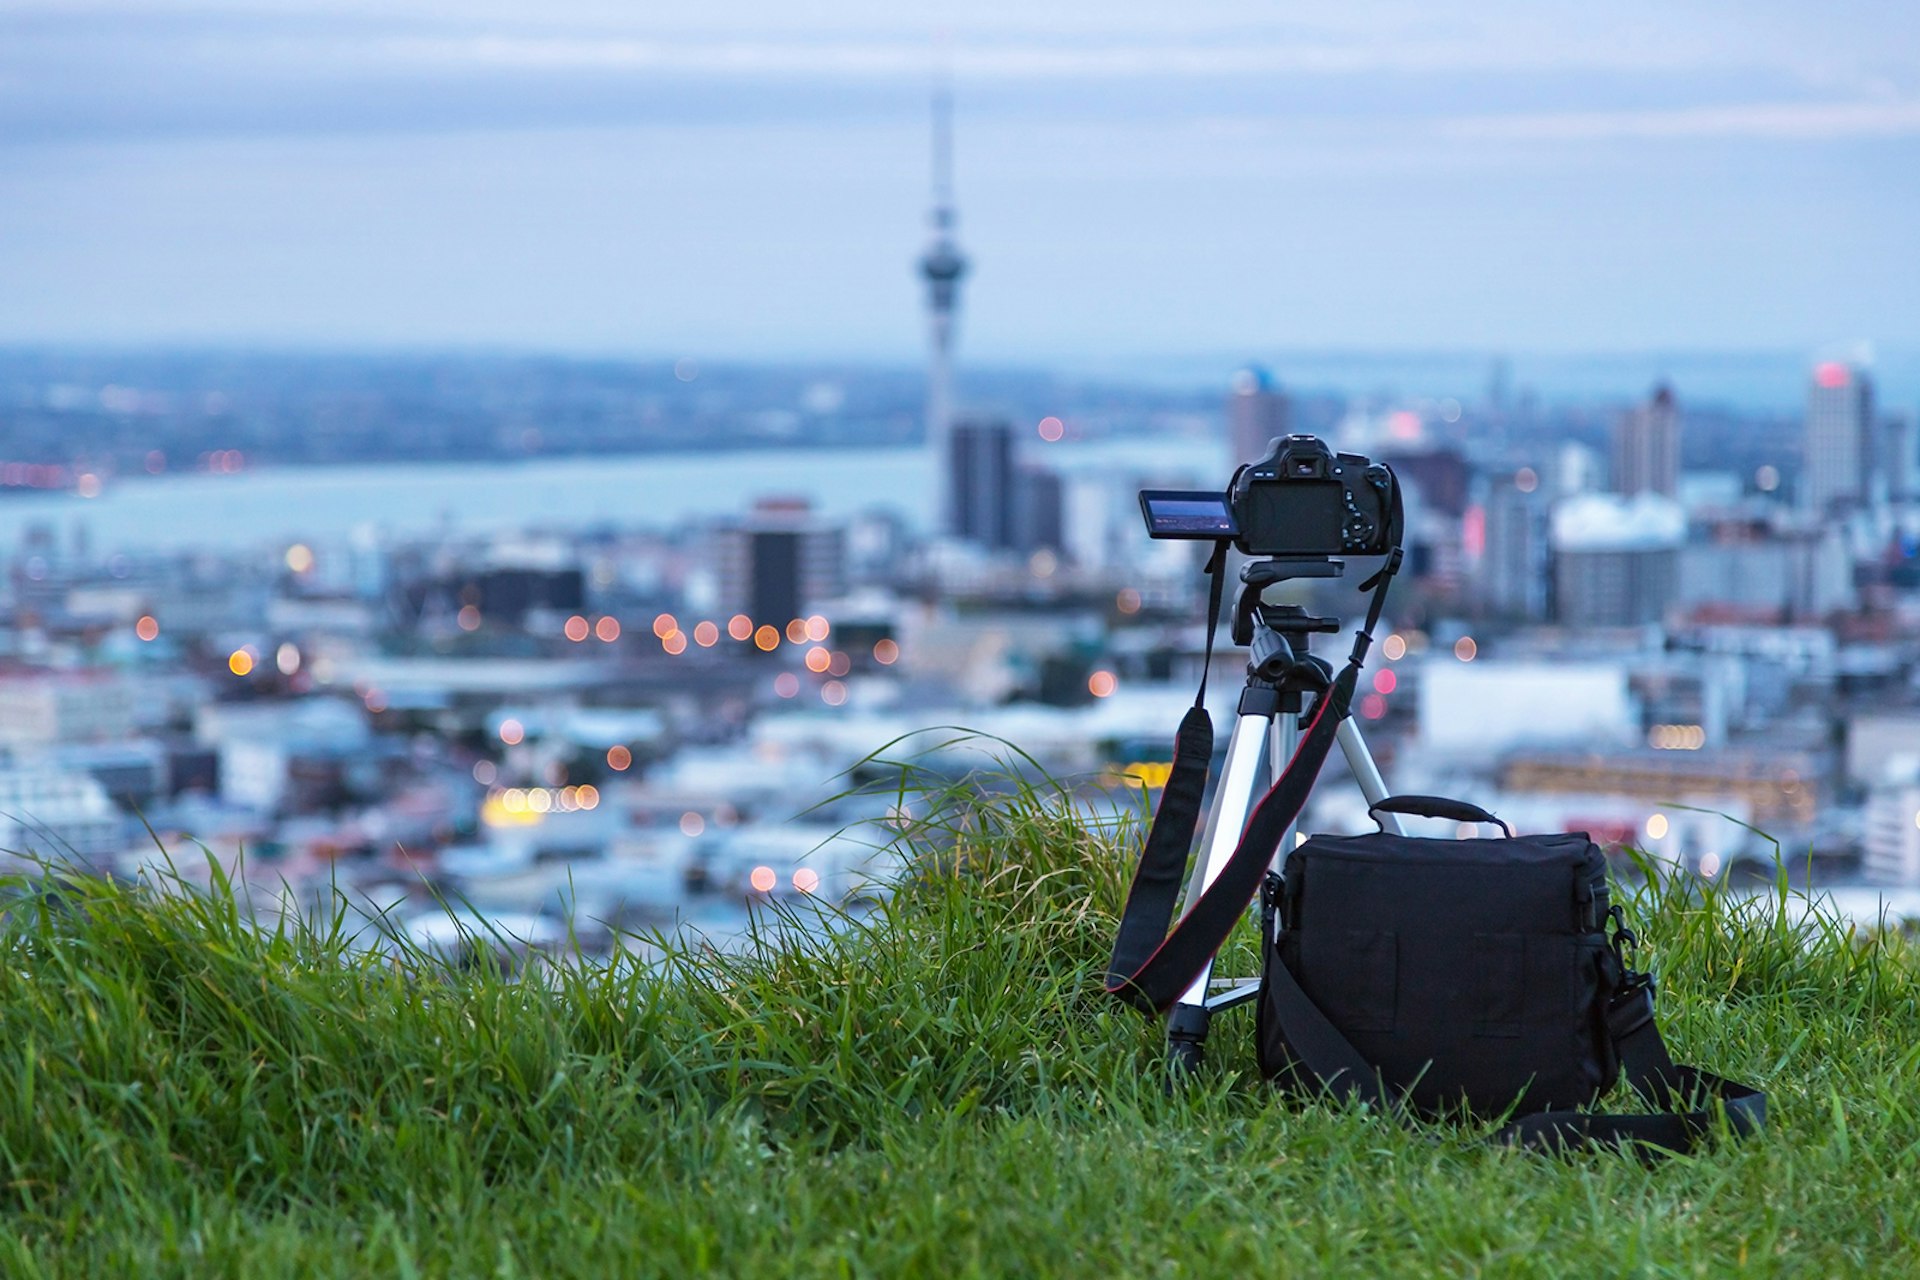 Features - DSLR camera on a tripod taking photos